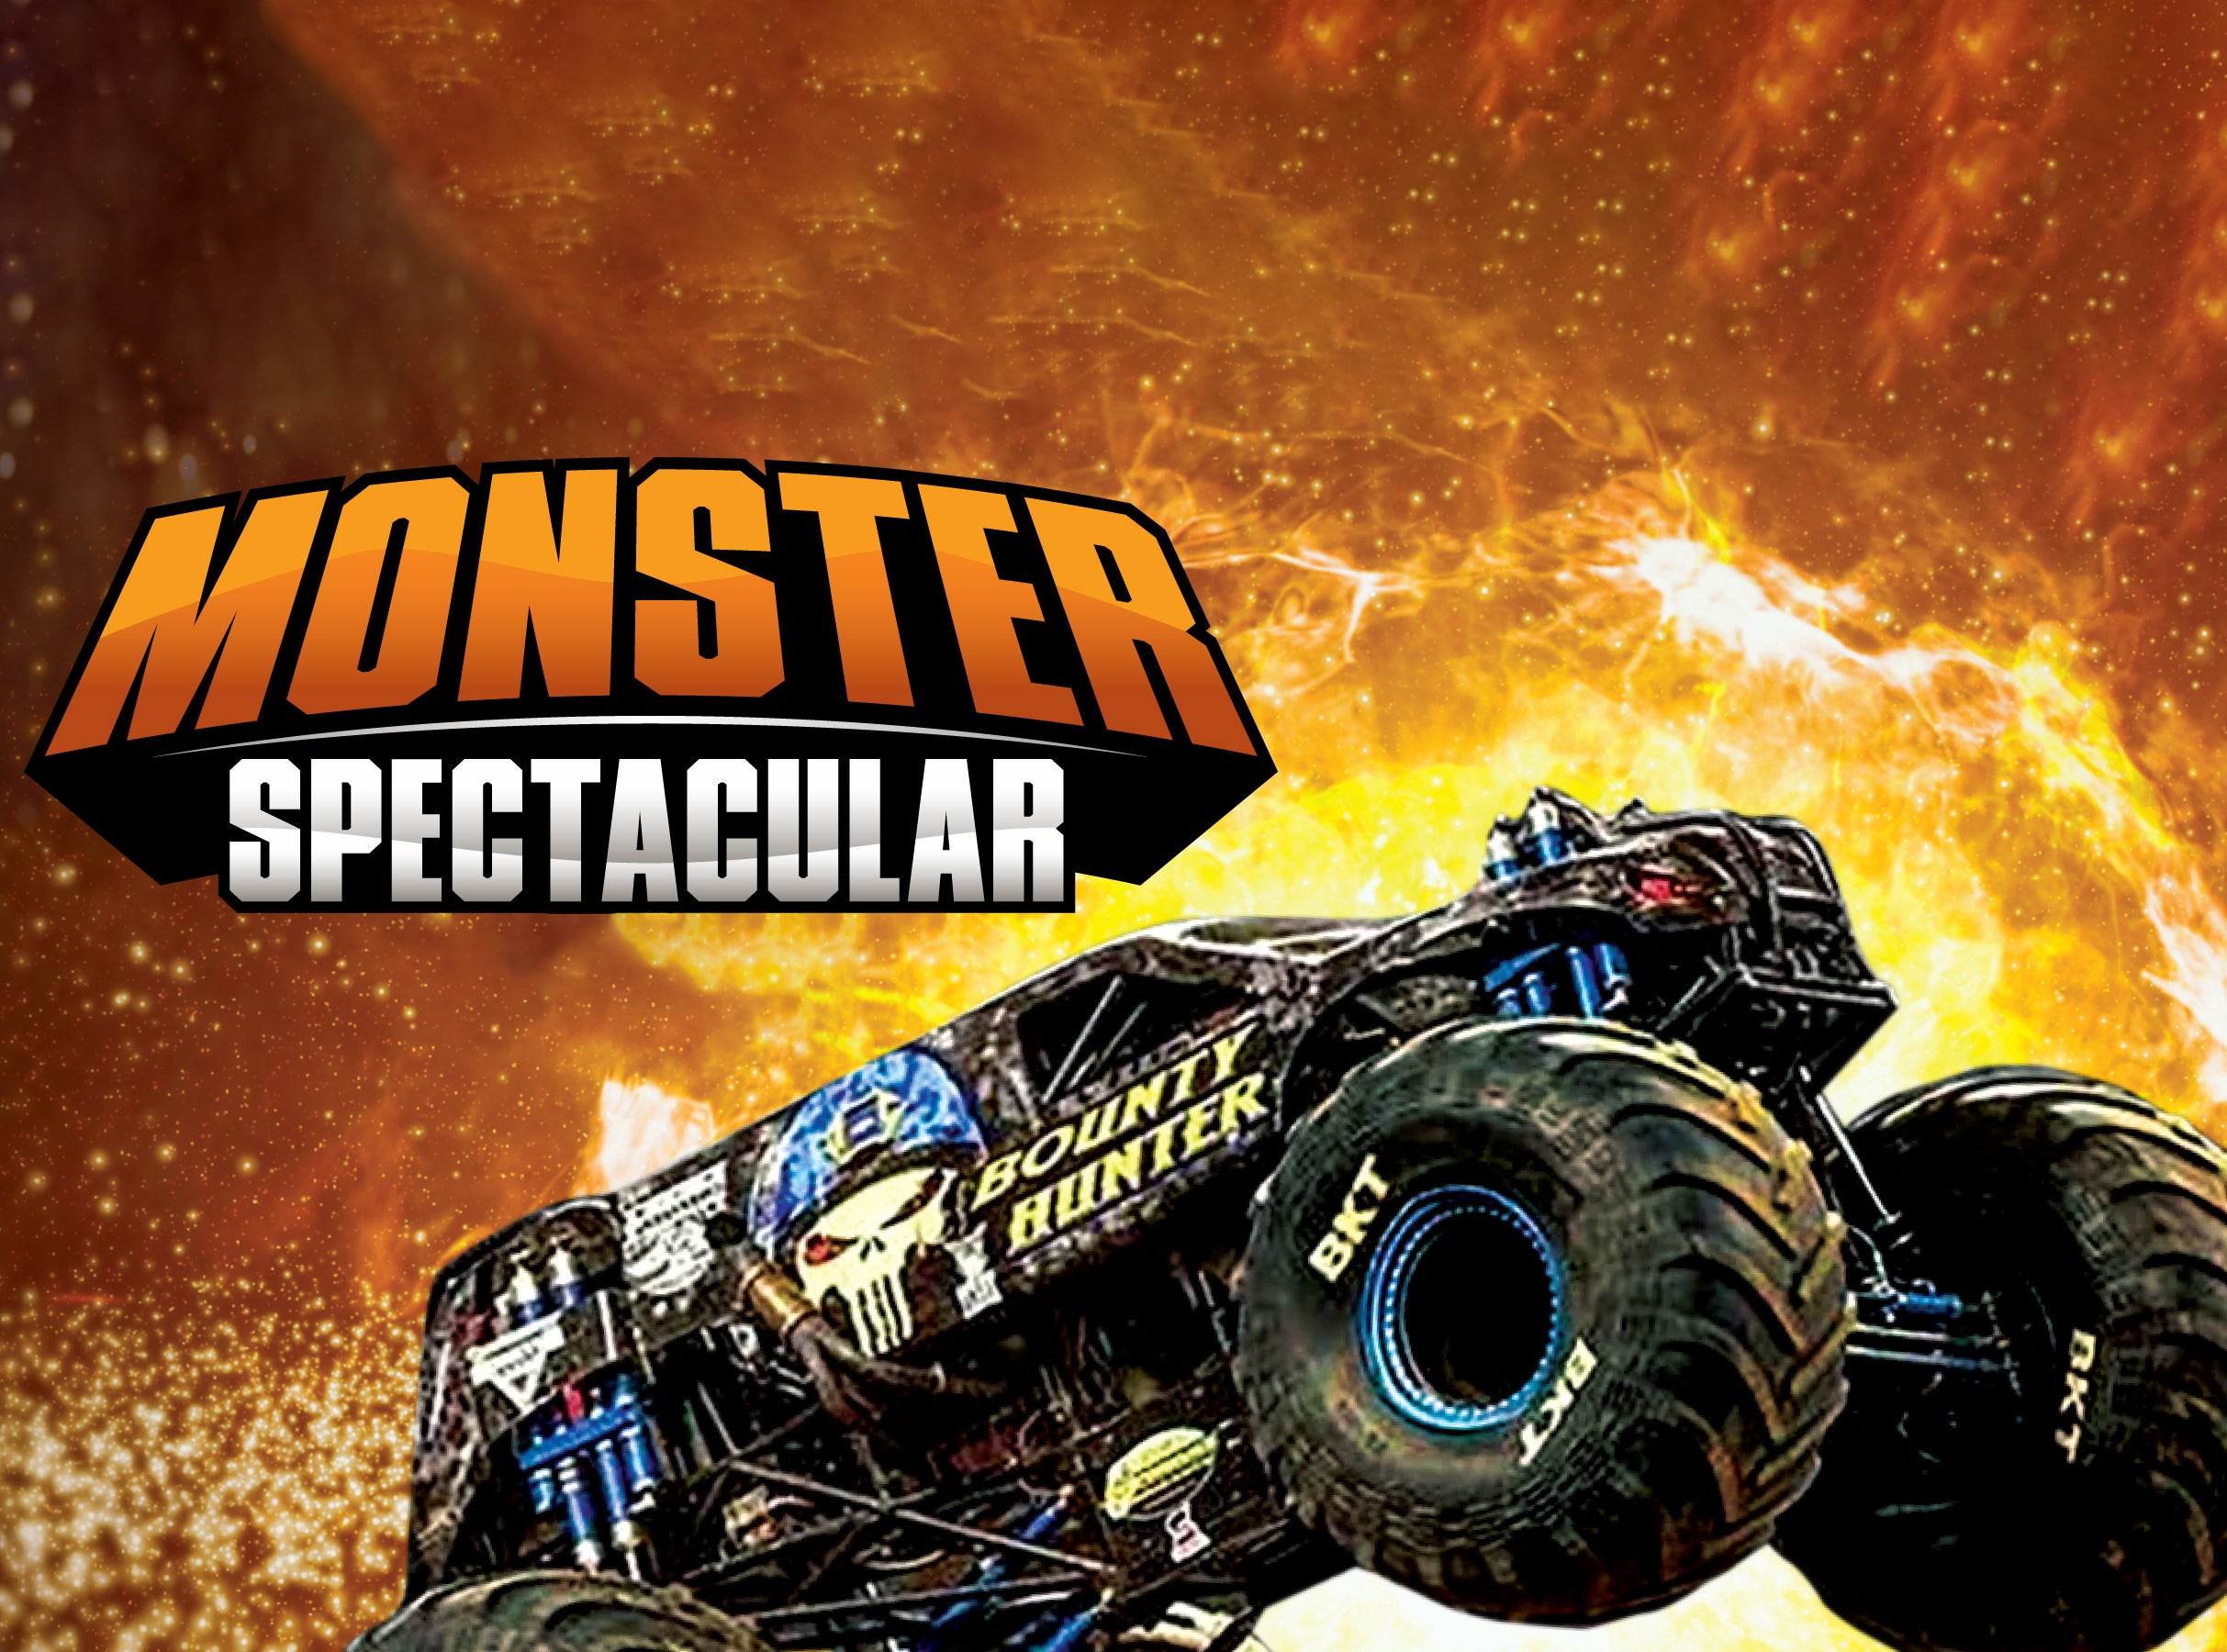 members only presale code to Monster Spectacular face value tickets in Moncton